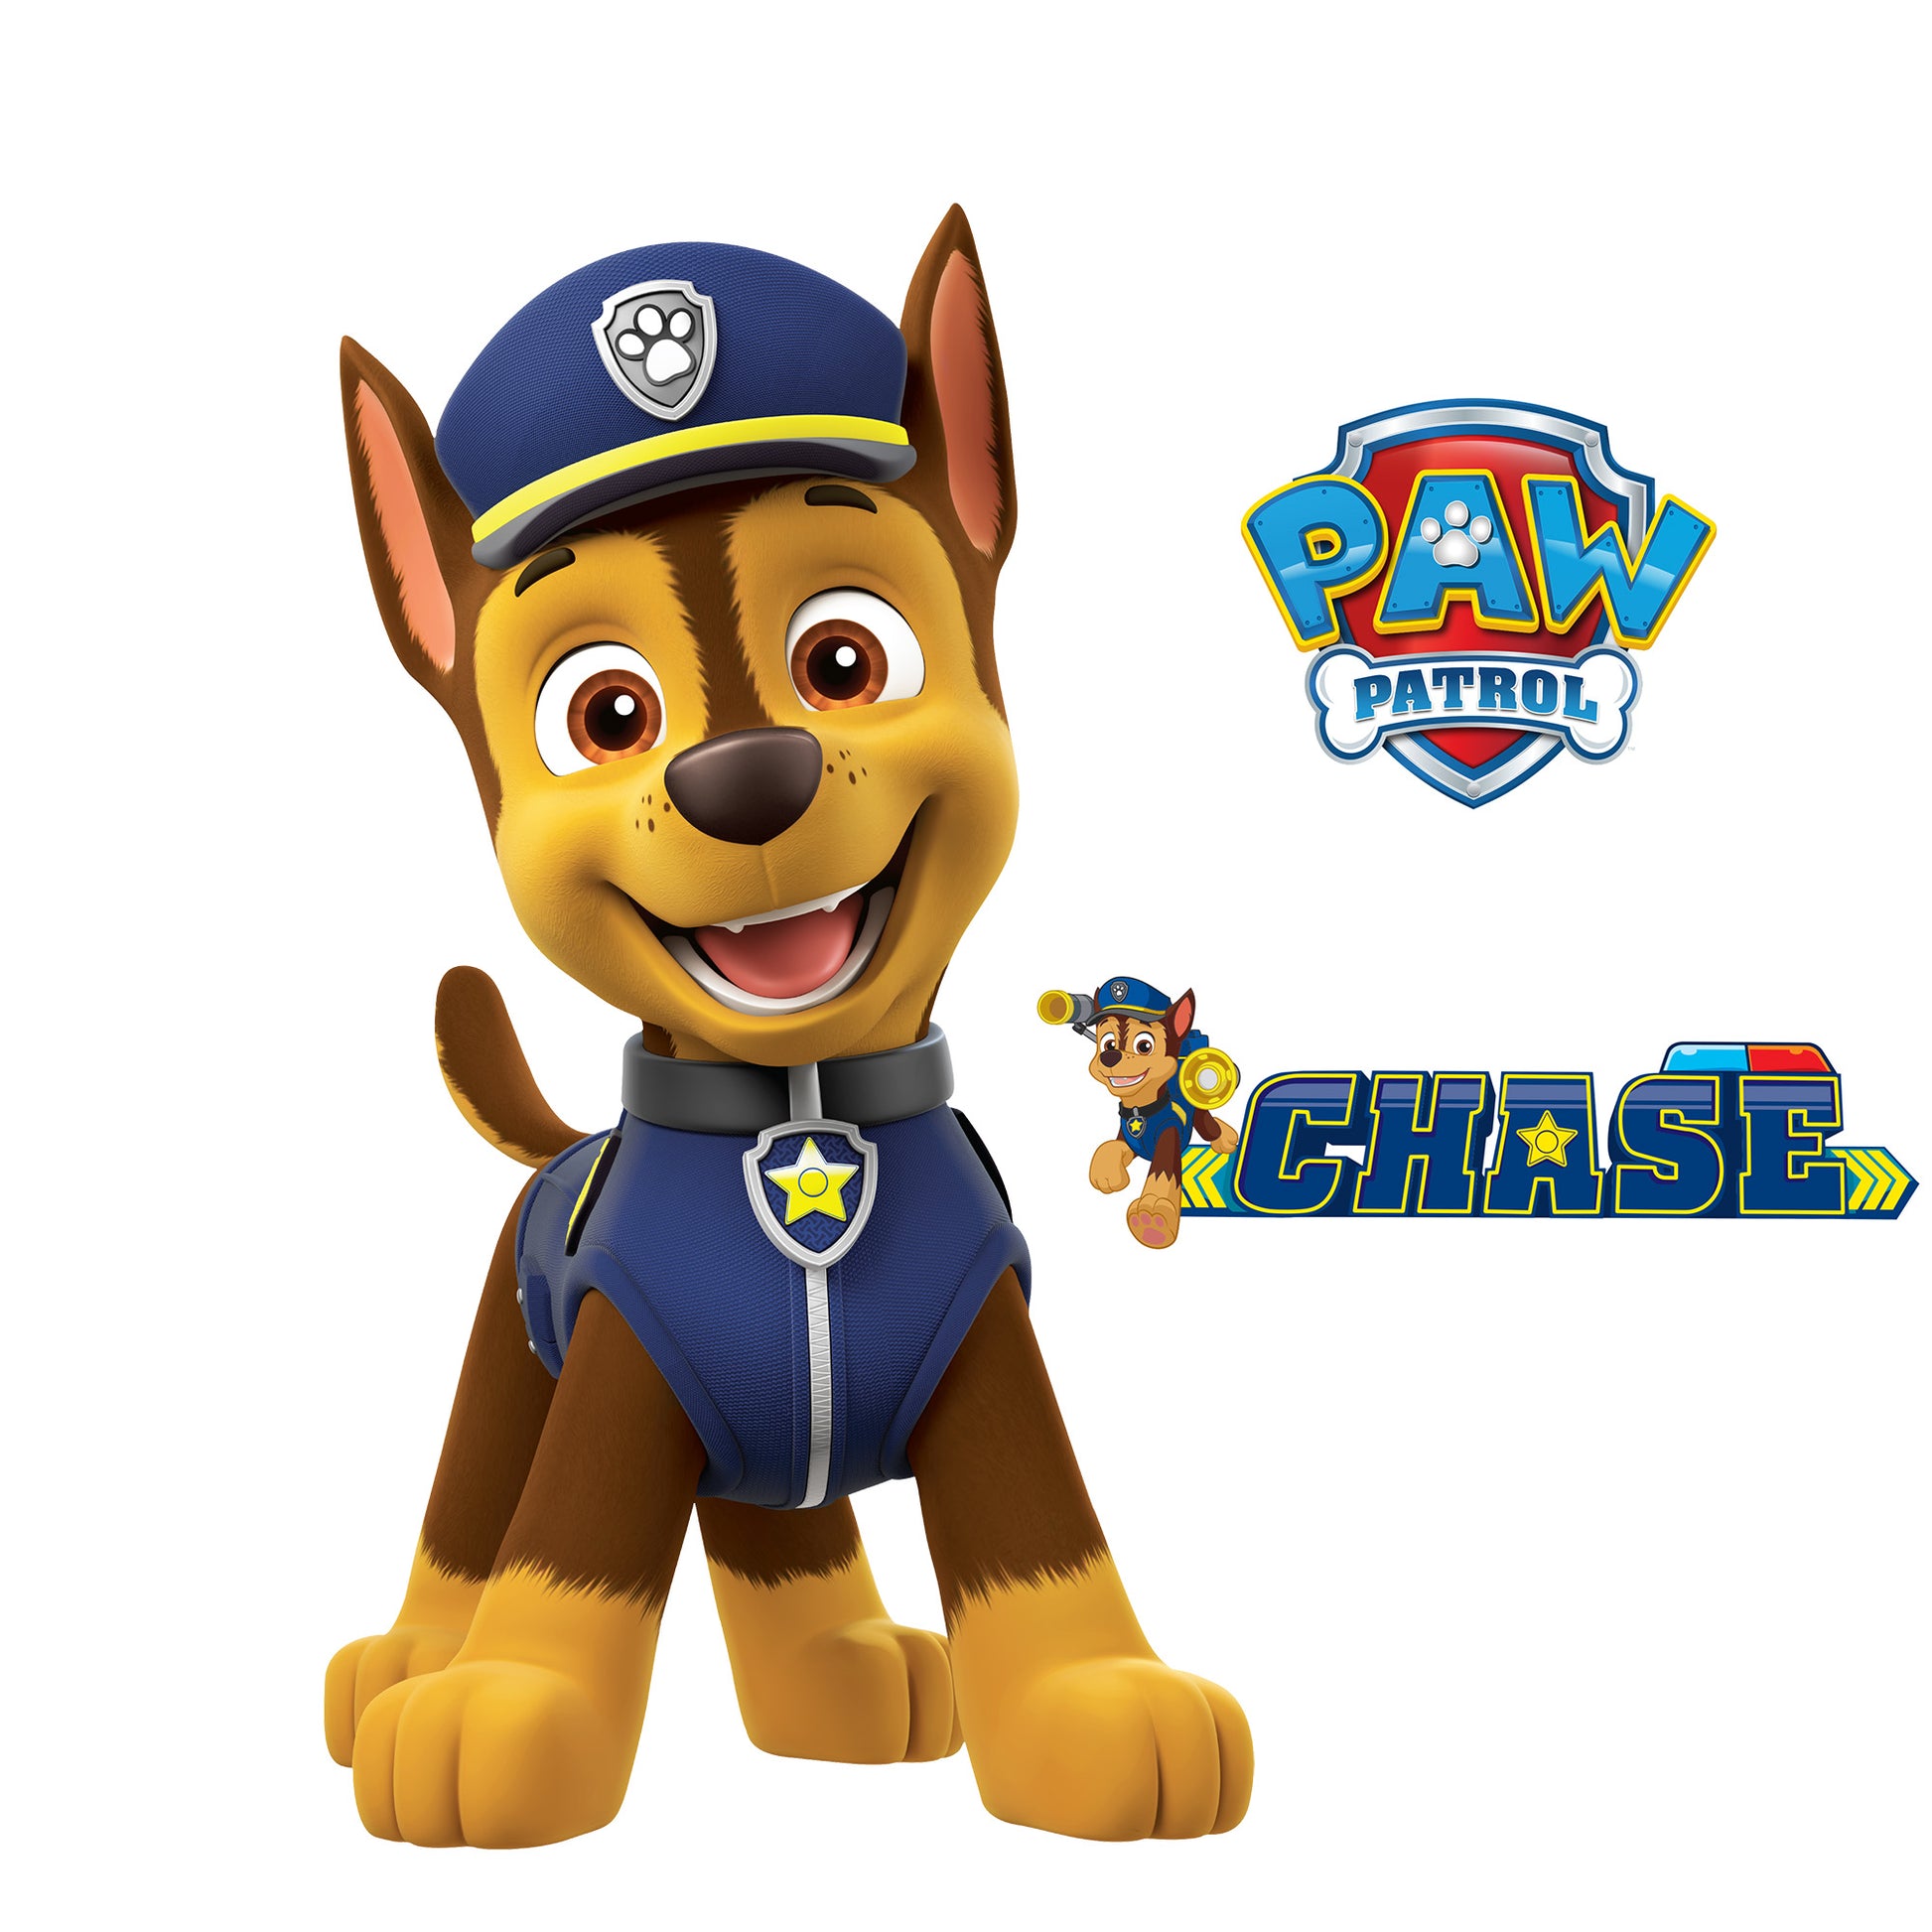 Paw Patrol: Chase RealBig - Officially Licensed Nickelodeon Removable  Adhesive Decal